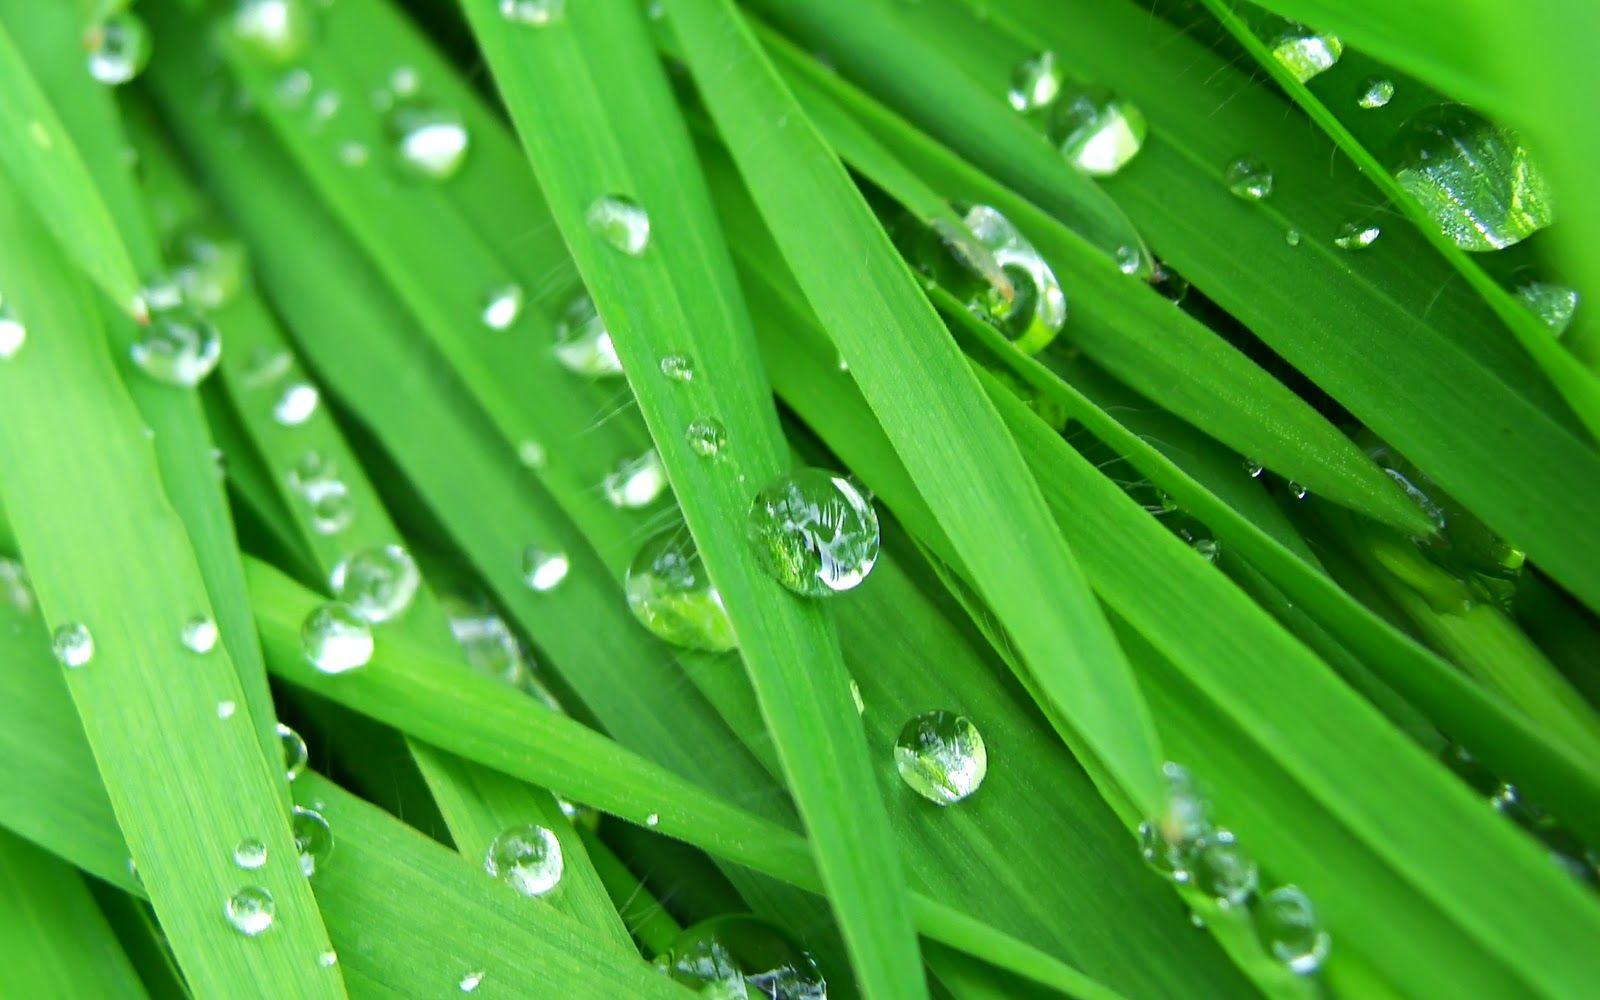 Raindrops with Image in Them. Amazing HD Raindrops Wallpaper